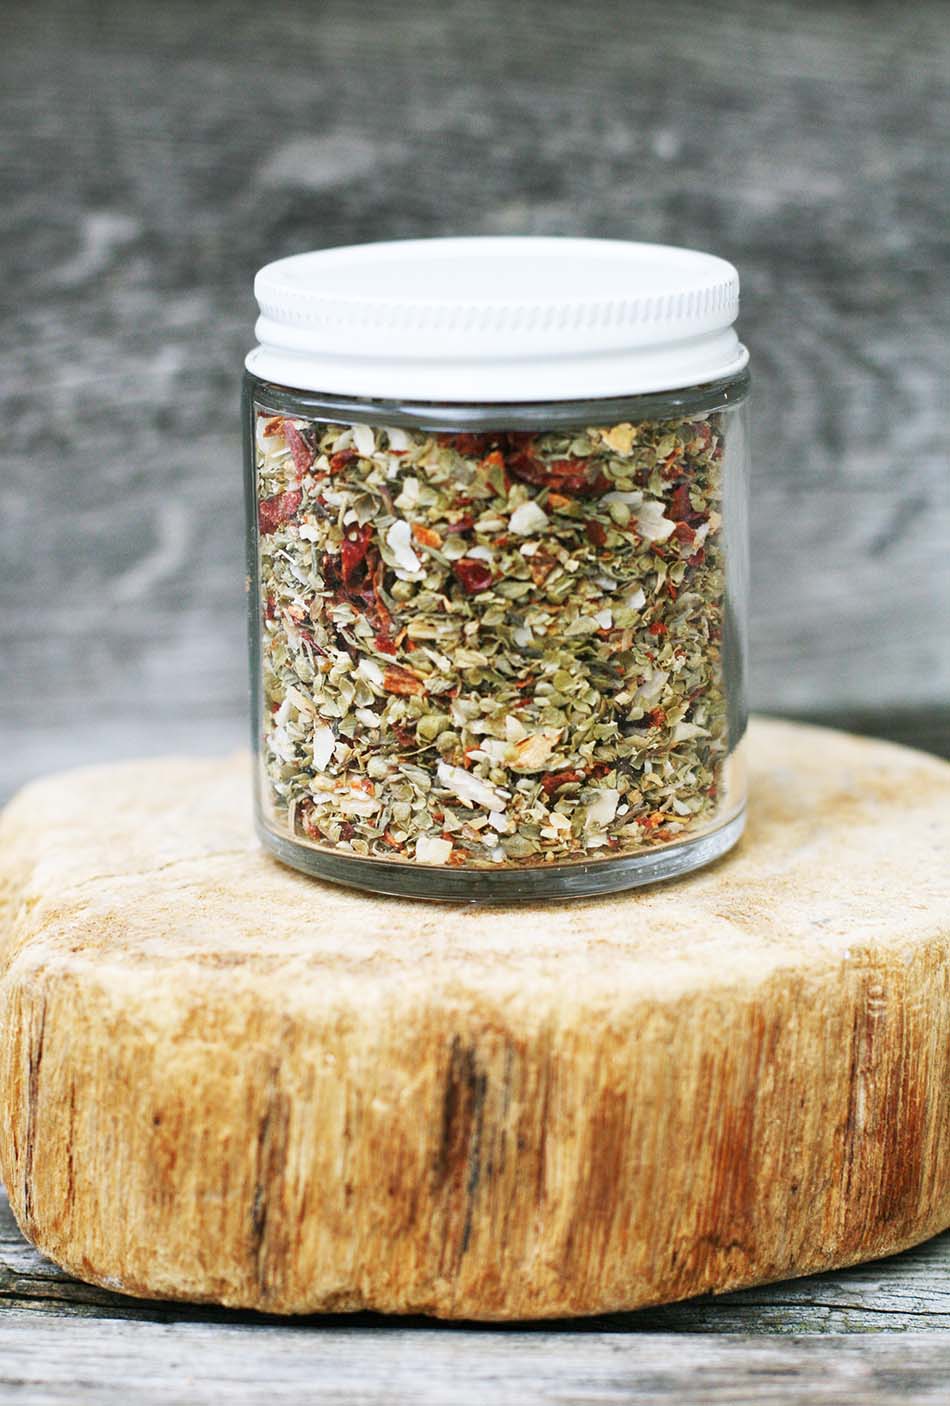 Homemade spice blend for pizza Makes a great gift! Click through for recipe.